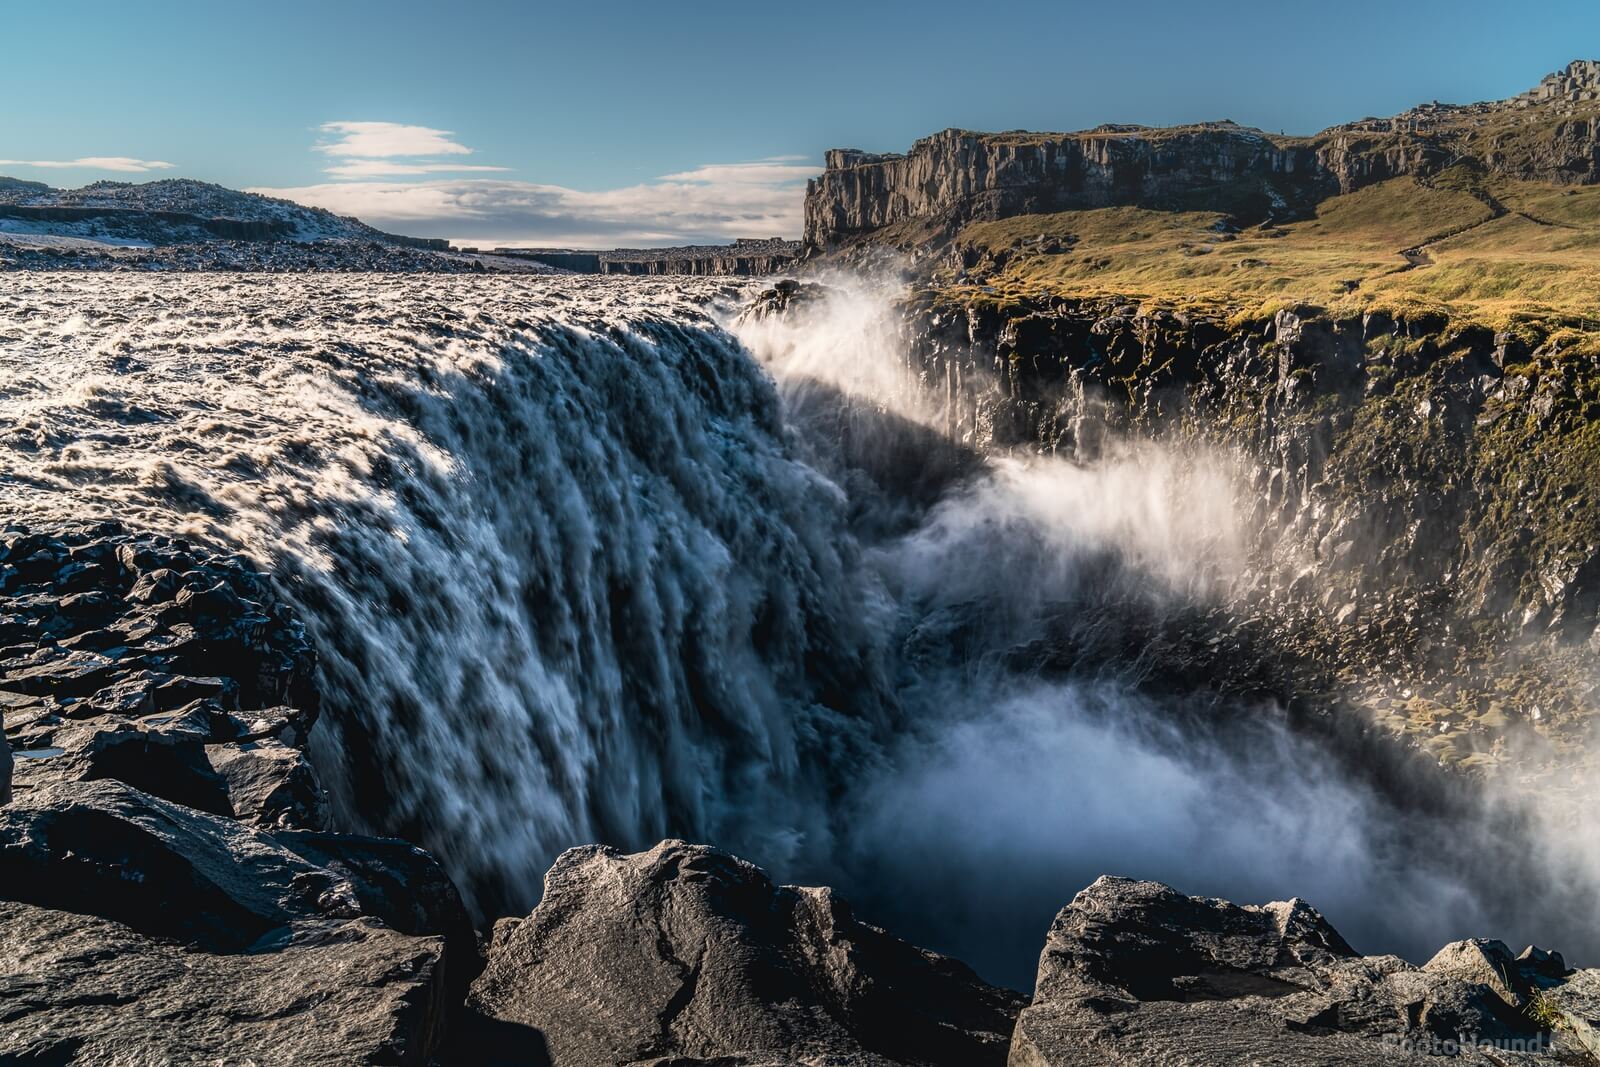 Image of Dettifoss by James Billings.